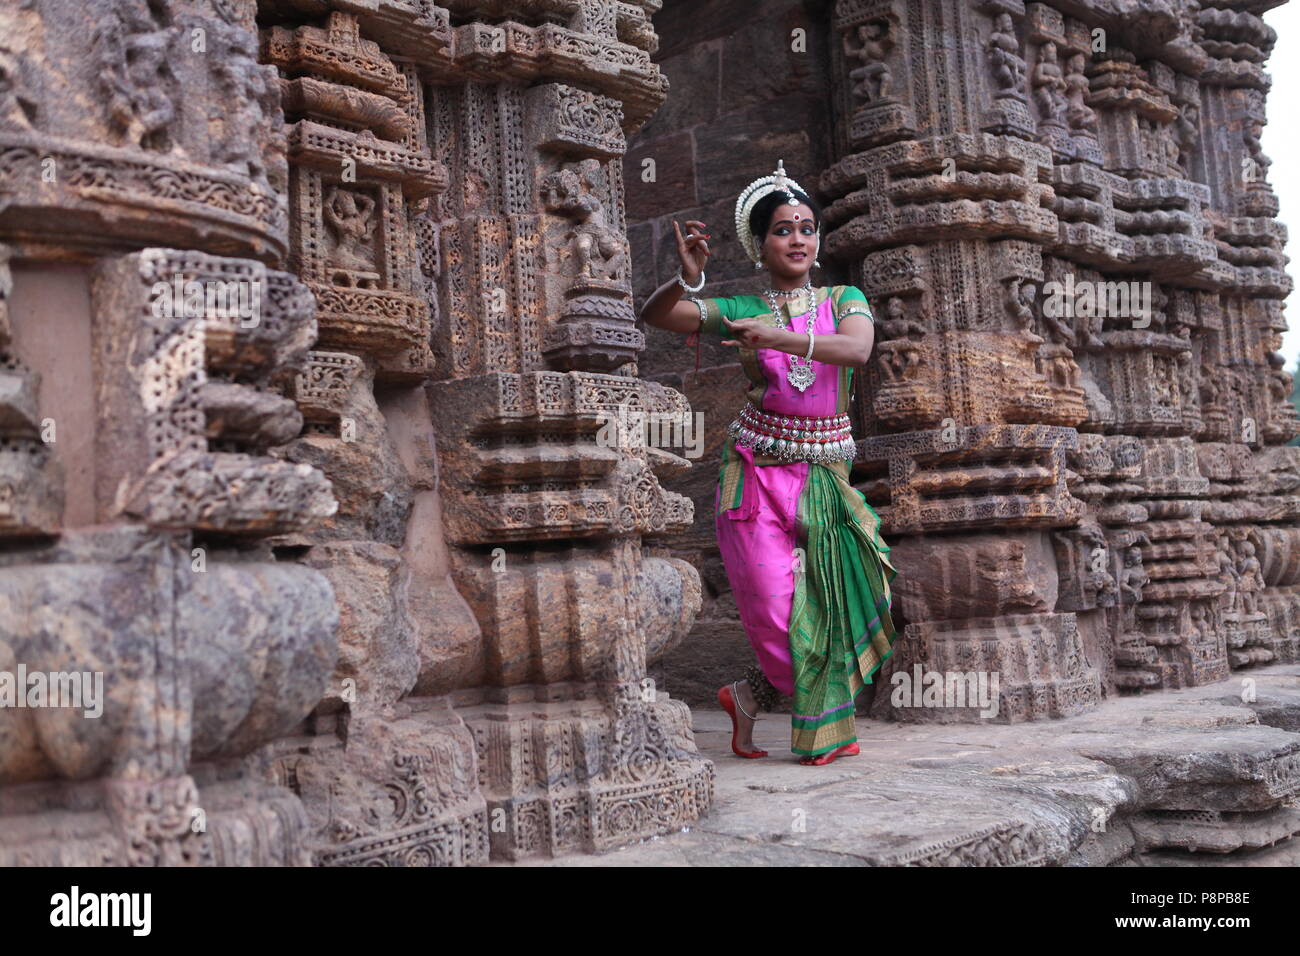 odissi is one of the eight classical dance forms of india,from the state of odisha.here the dancer poses before temples with sculptures Stock Photo